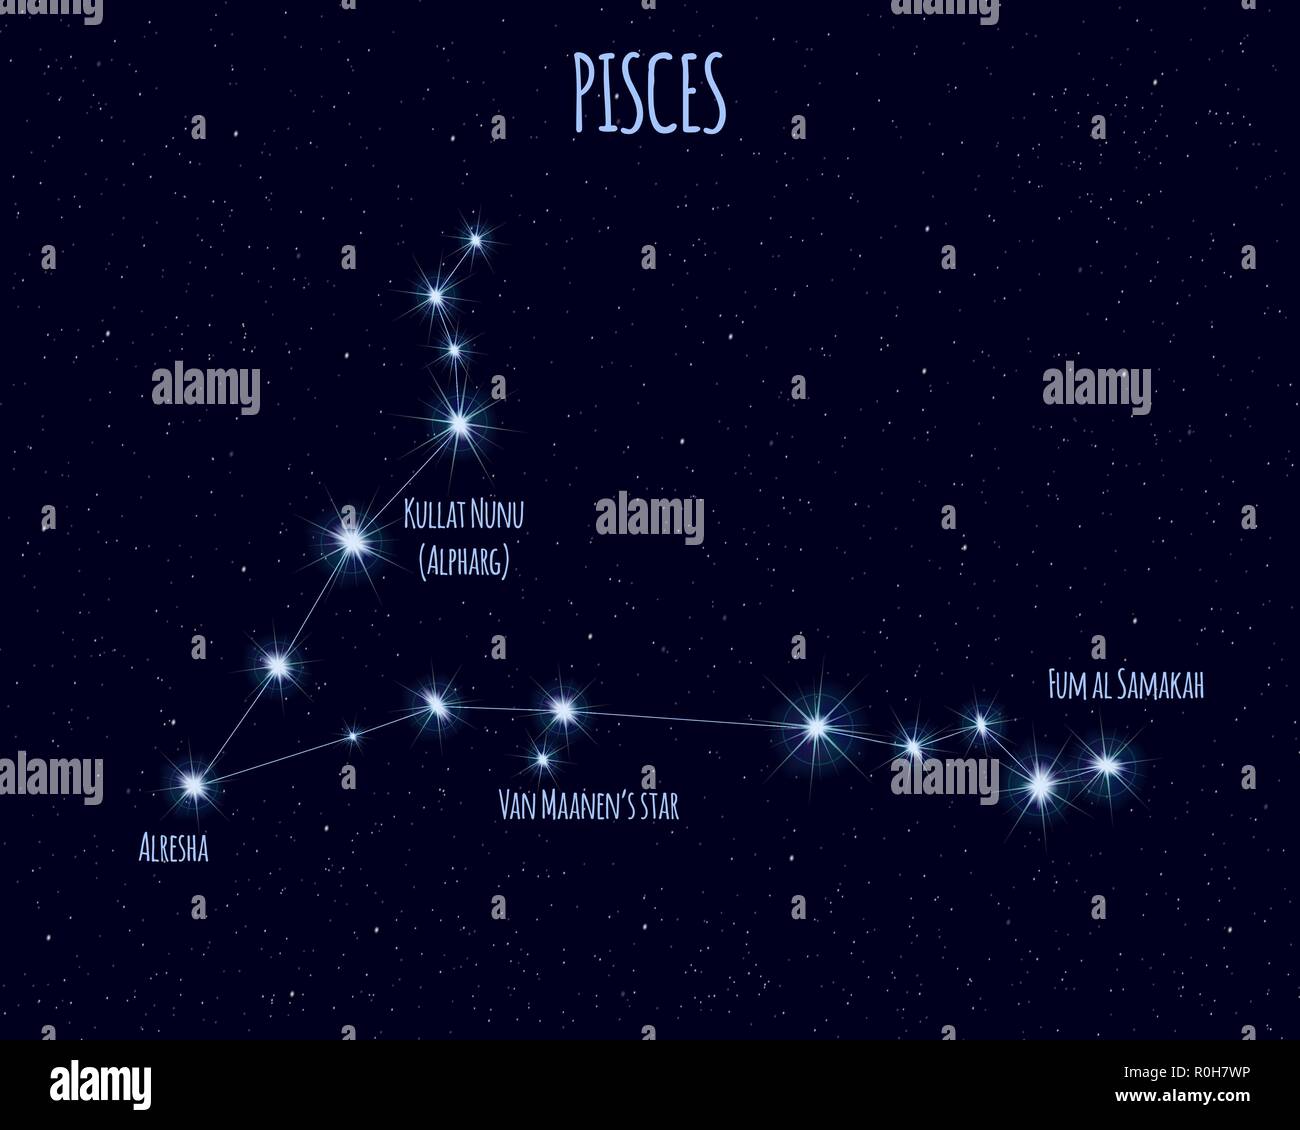 Pisces Constellation Star Names